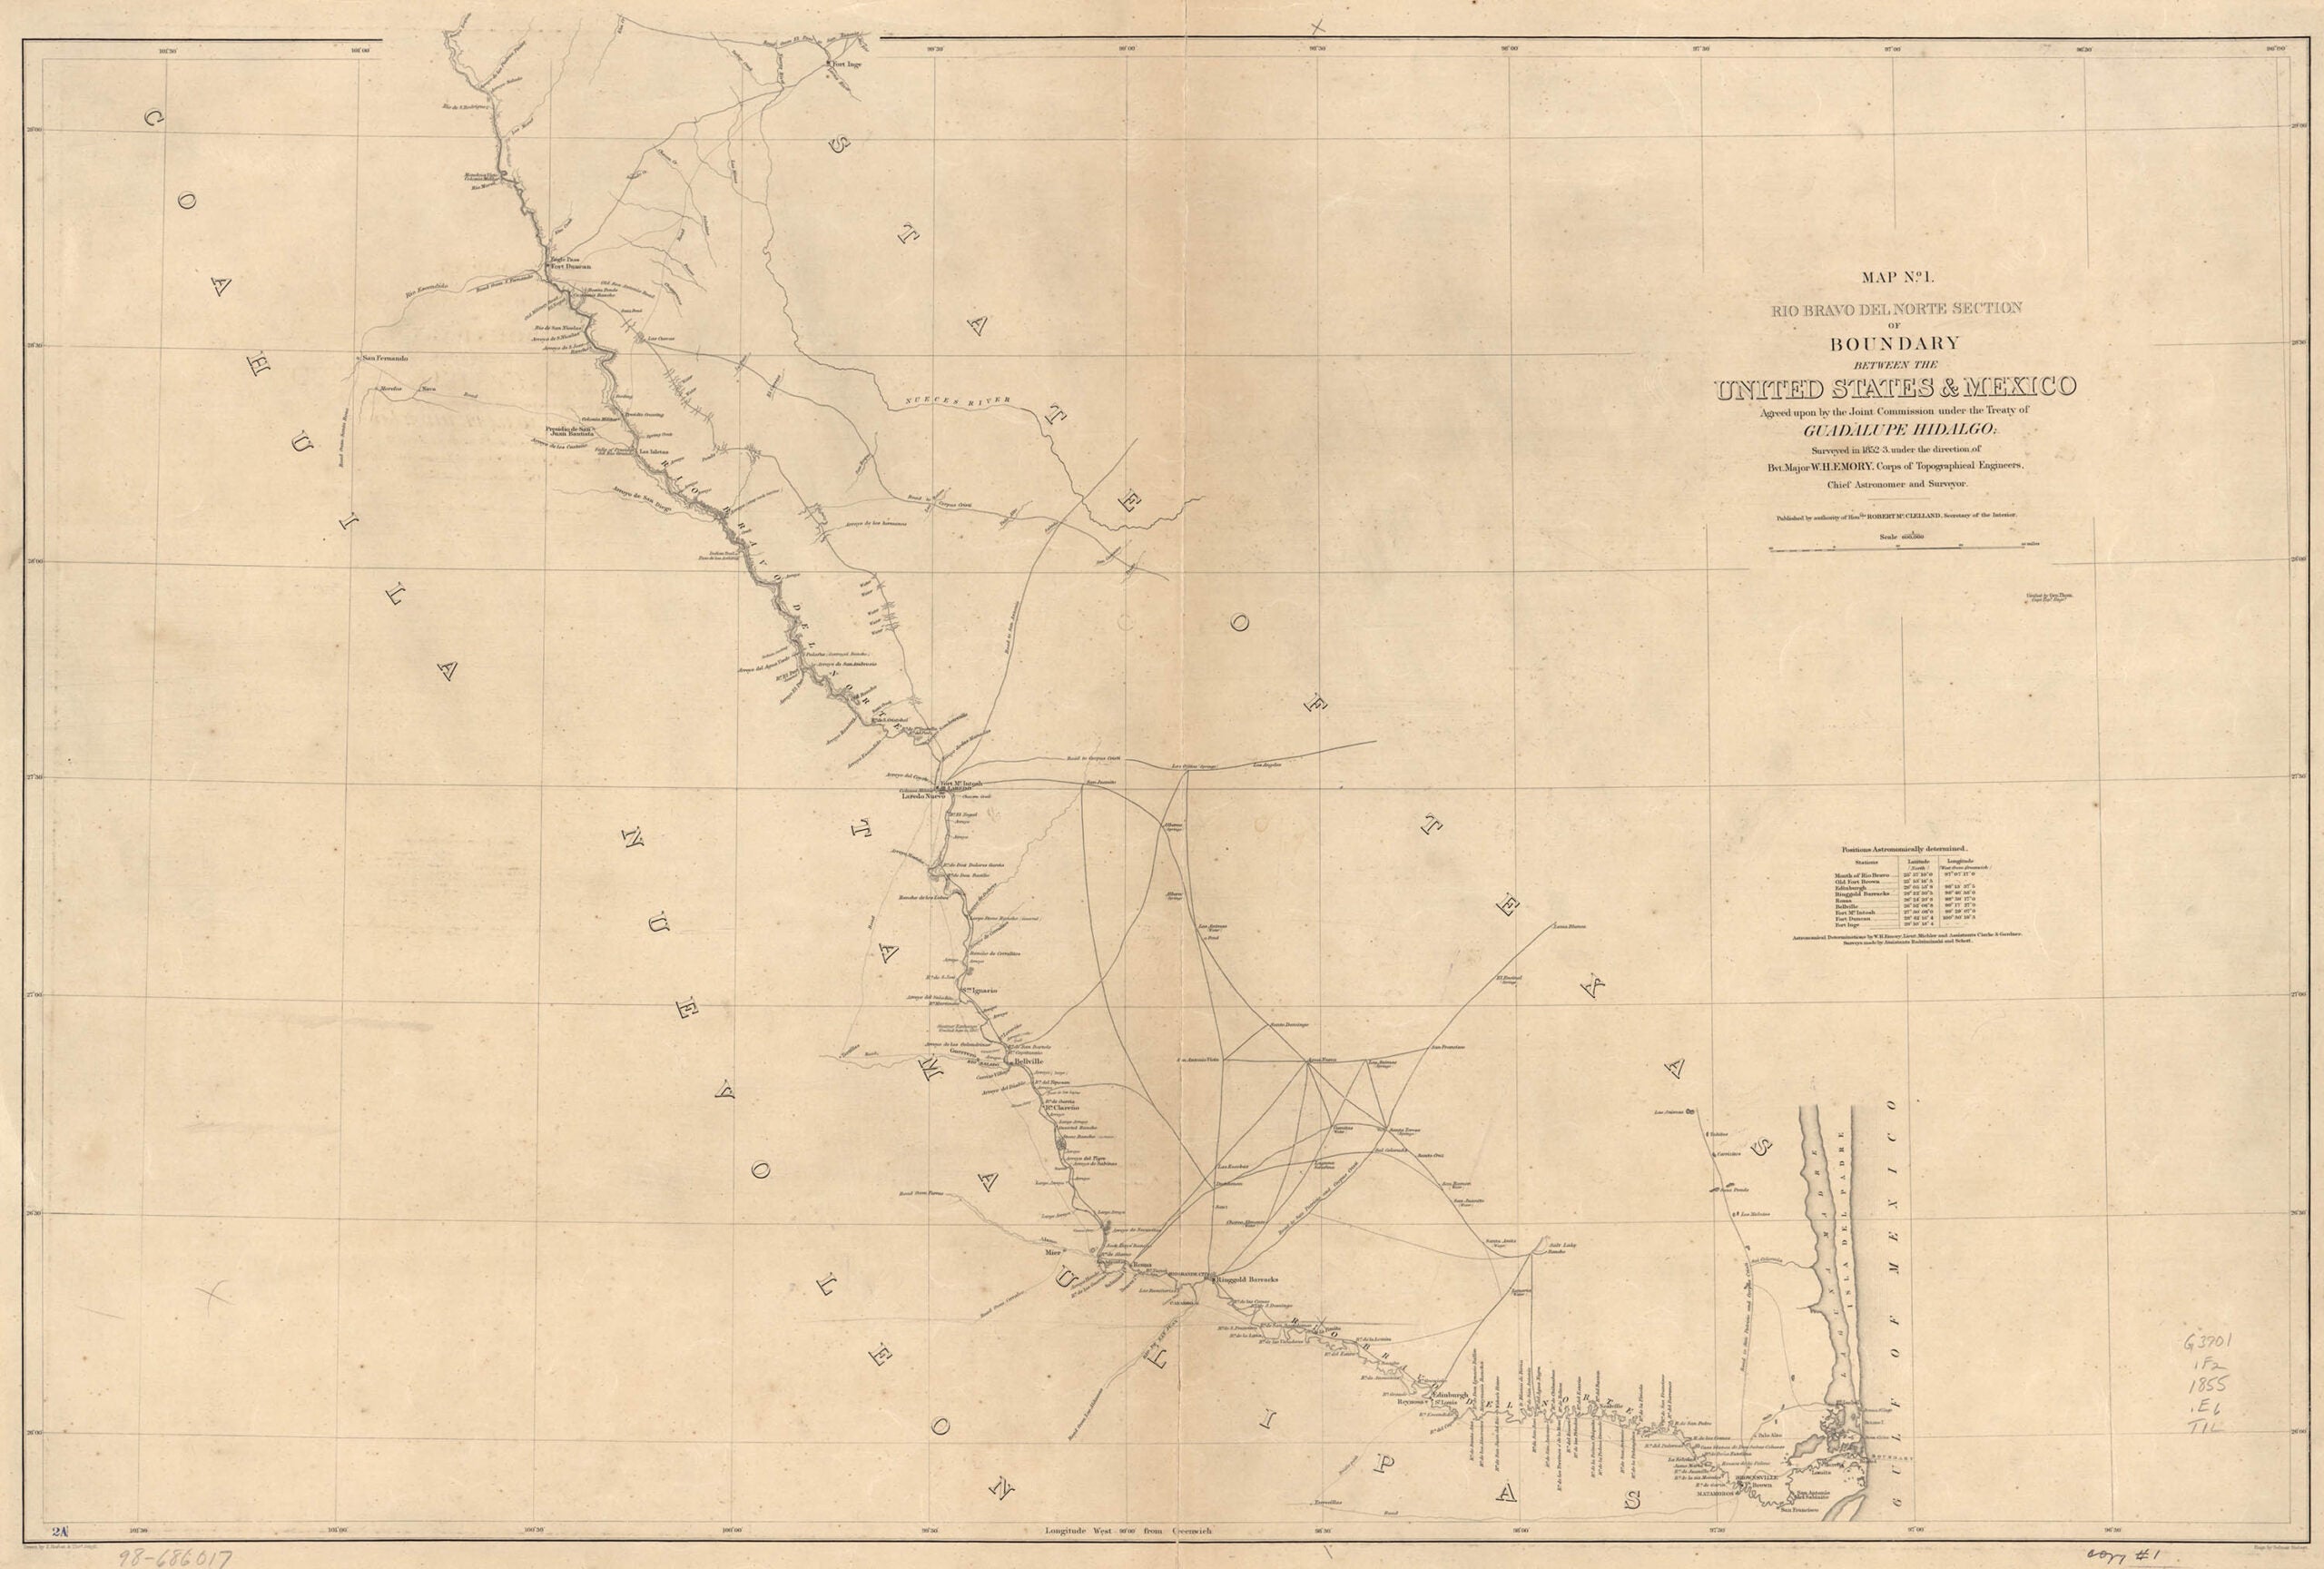 Map of boundary between the United States & Mexico agreed upon by the Joint Commission under the Treaty of Guadalupe Hidalgo : surveyed in 1852-53 under the direction of Bvt. Major W.H. Emory, Corps of Topographical Engineers, Chief Astronomer and Surveyor.